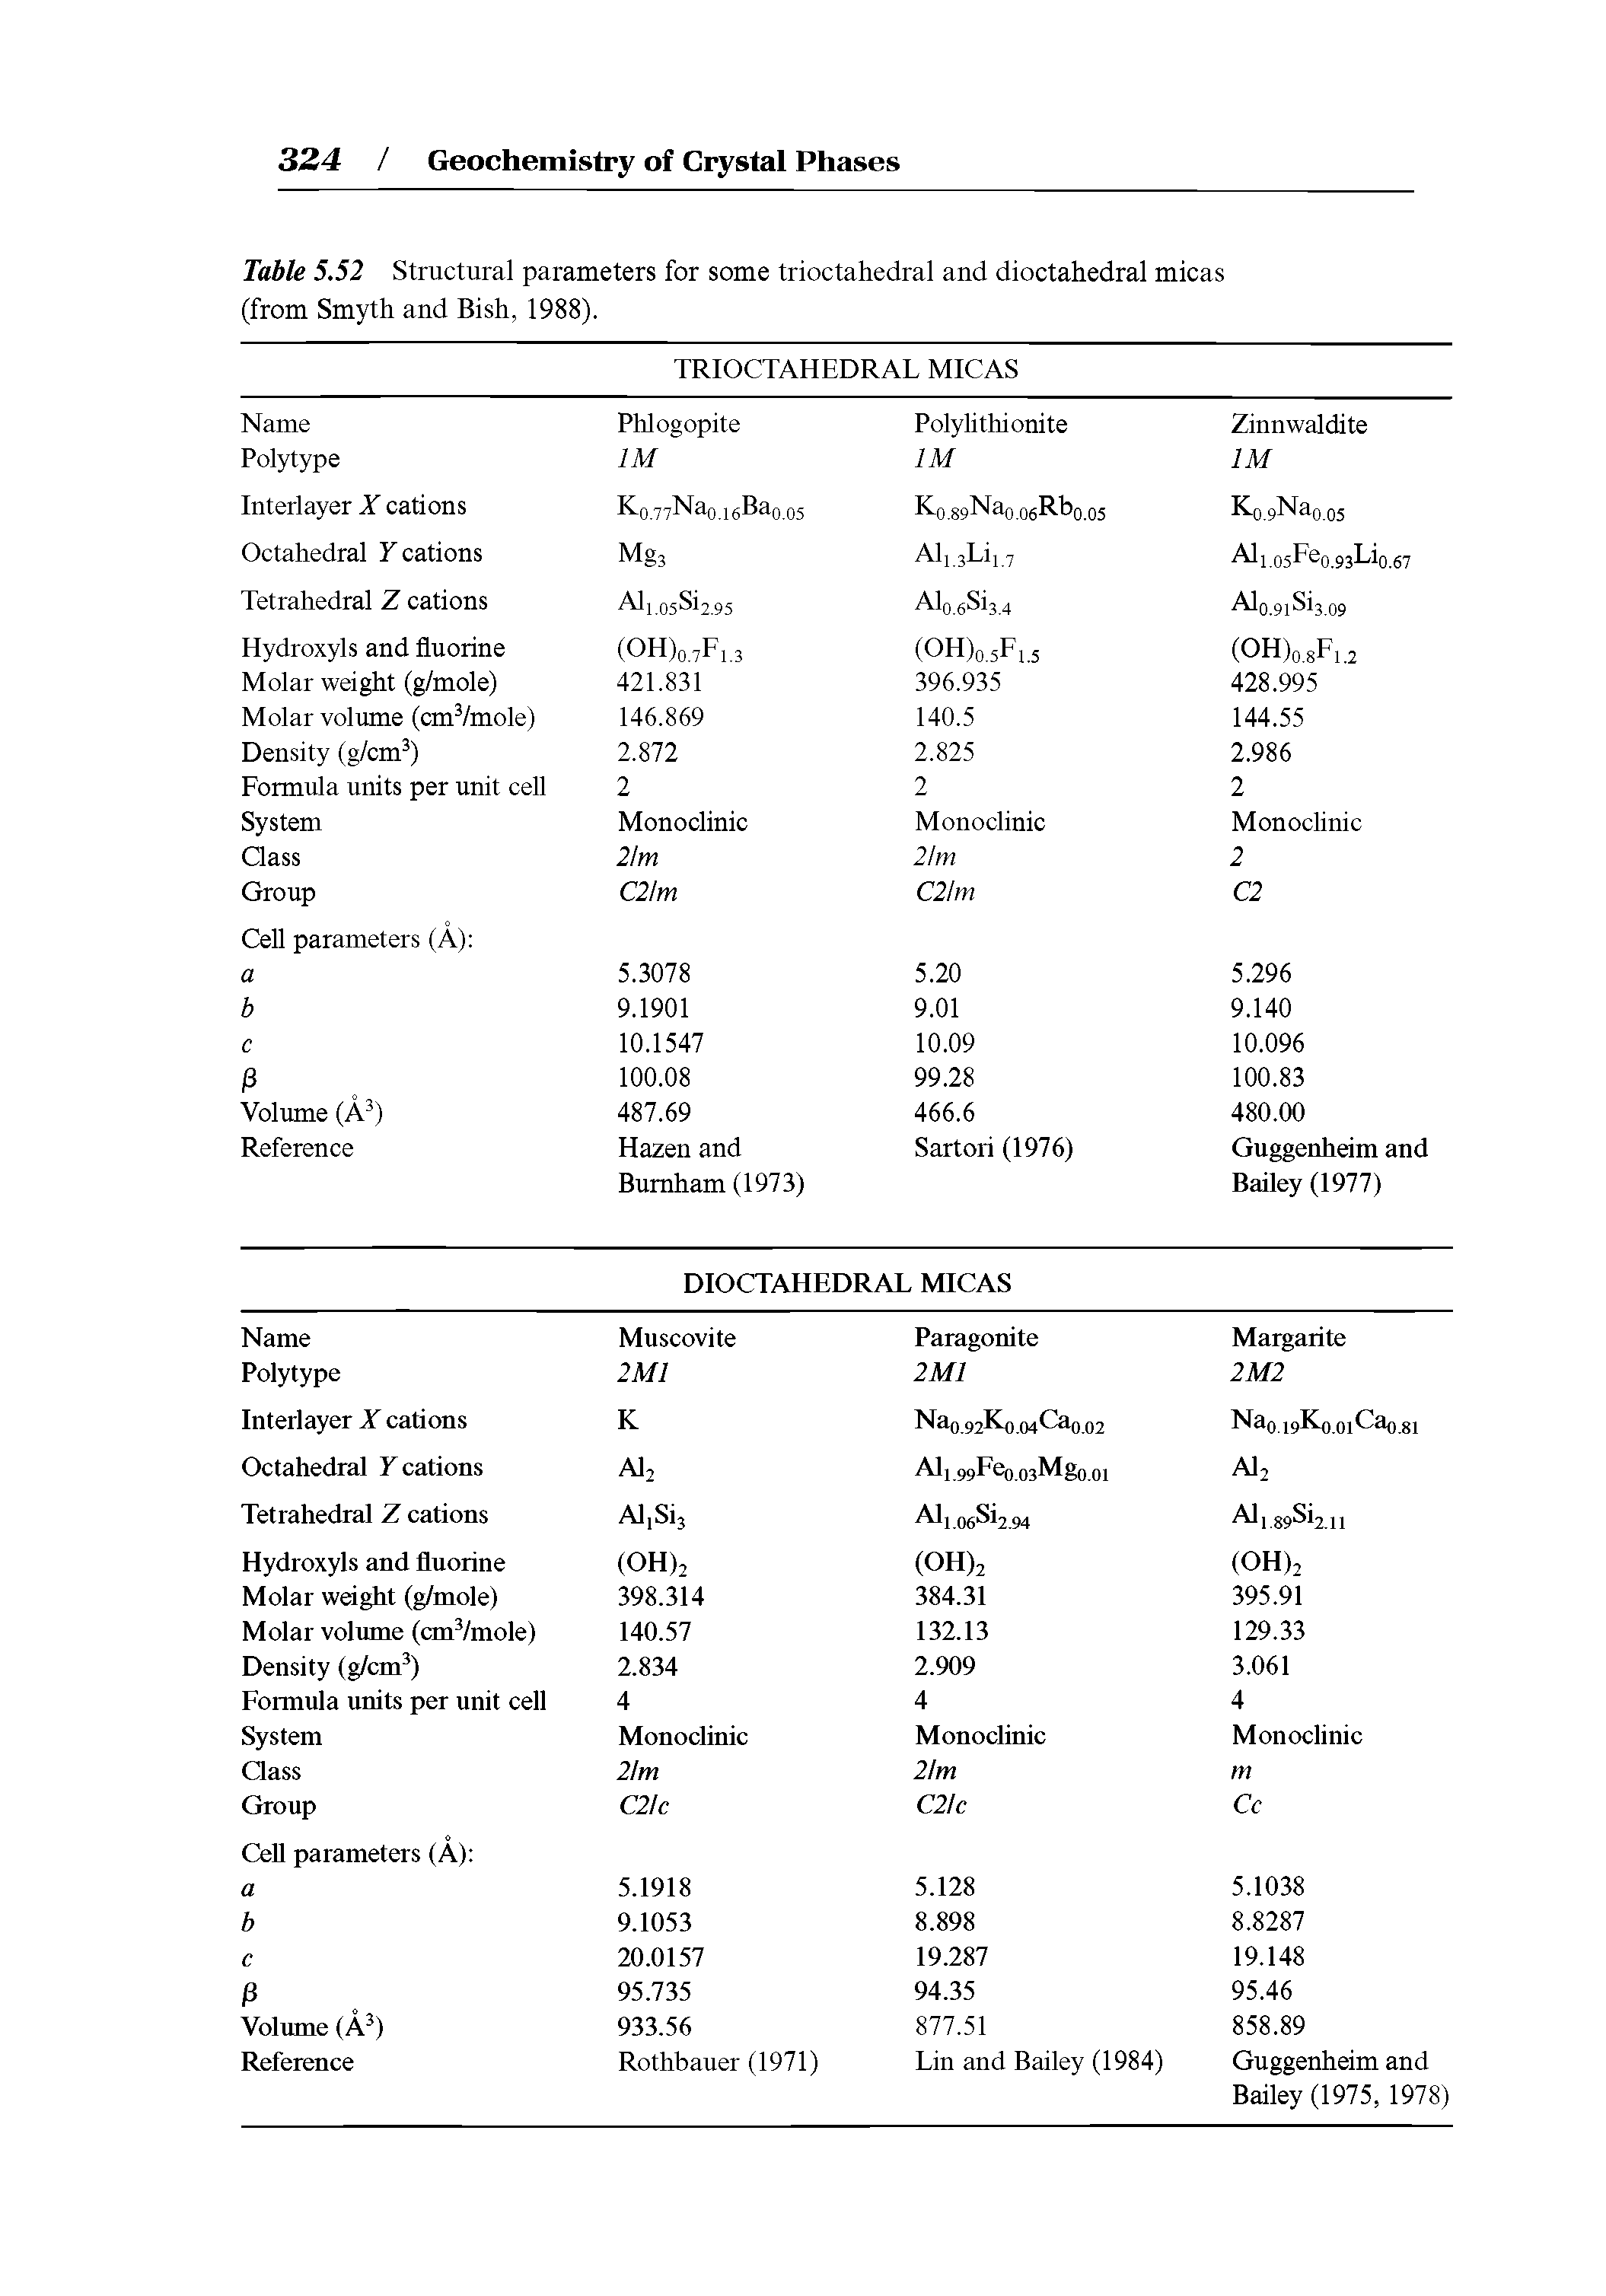 Table 5.52 Structural parameters for some trioctahedral and dioctahedral micas (from Smyth and Bish, 1988).